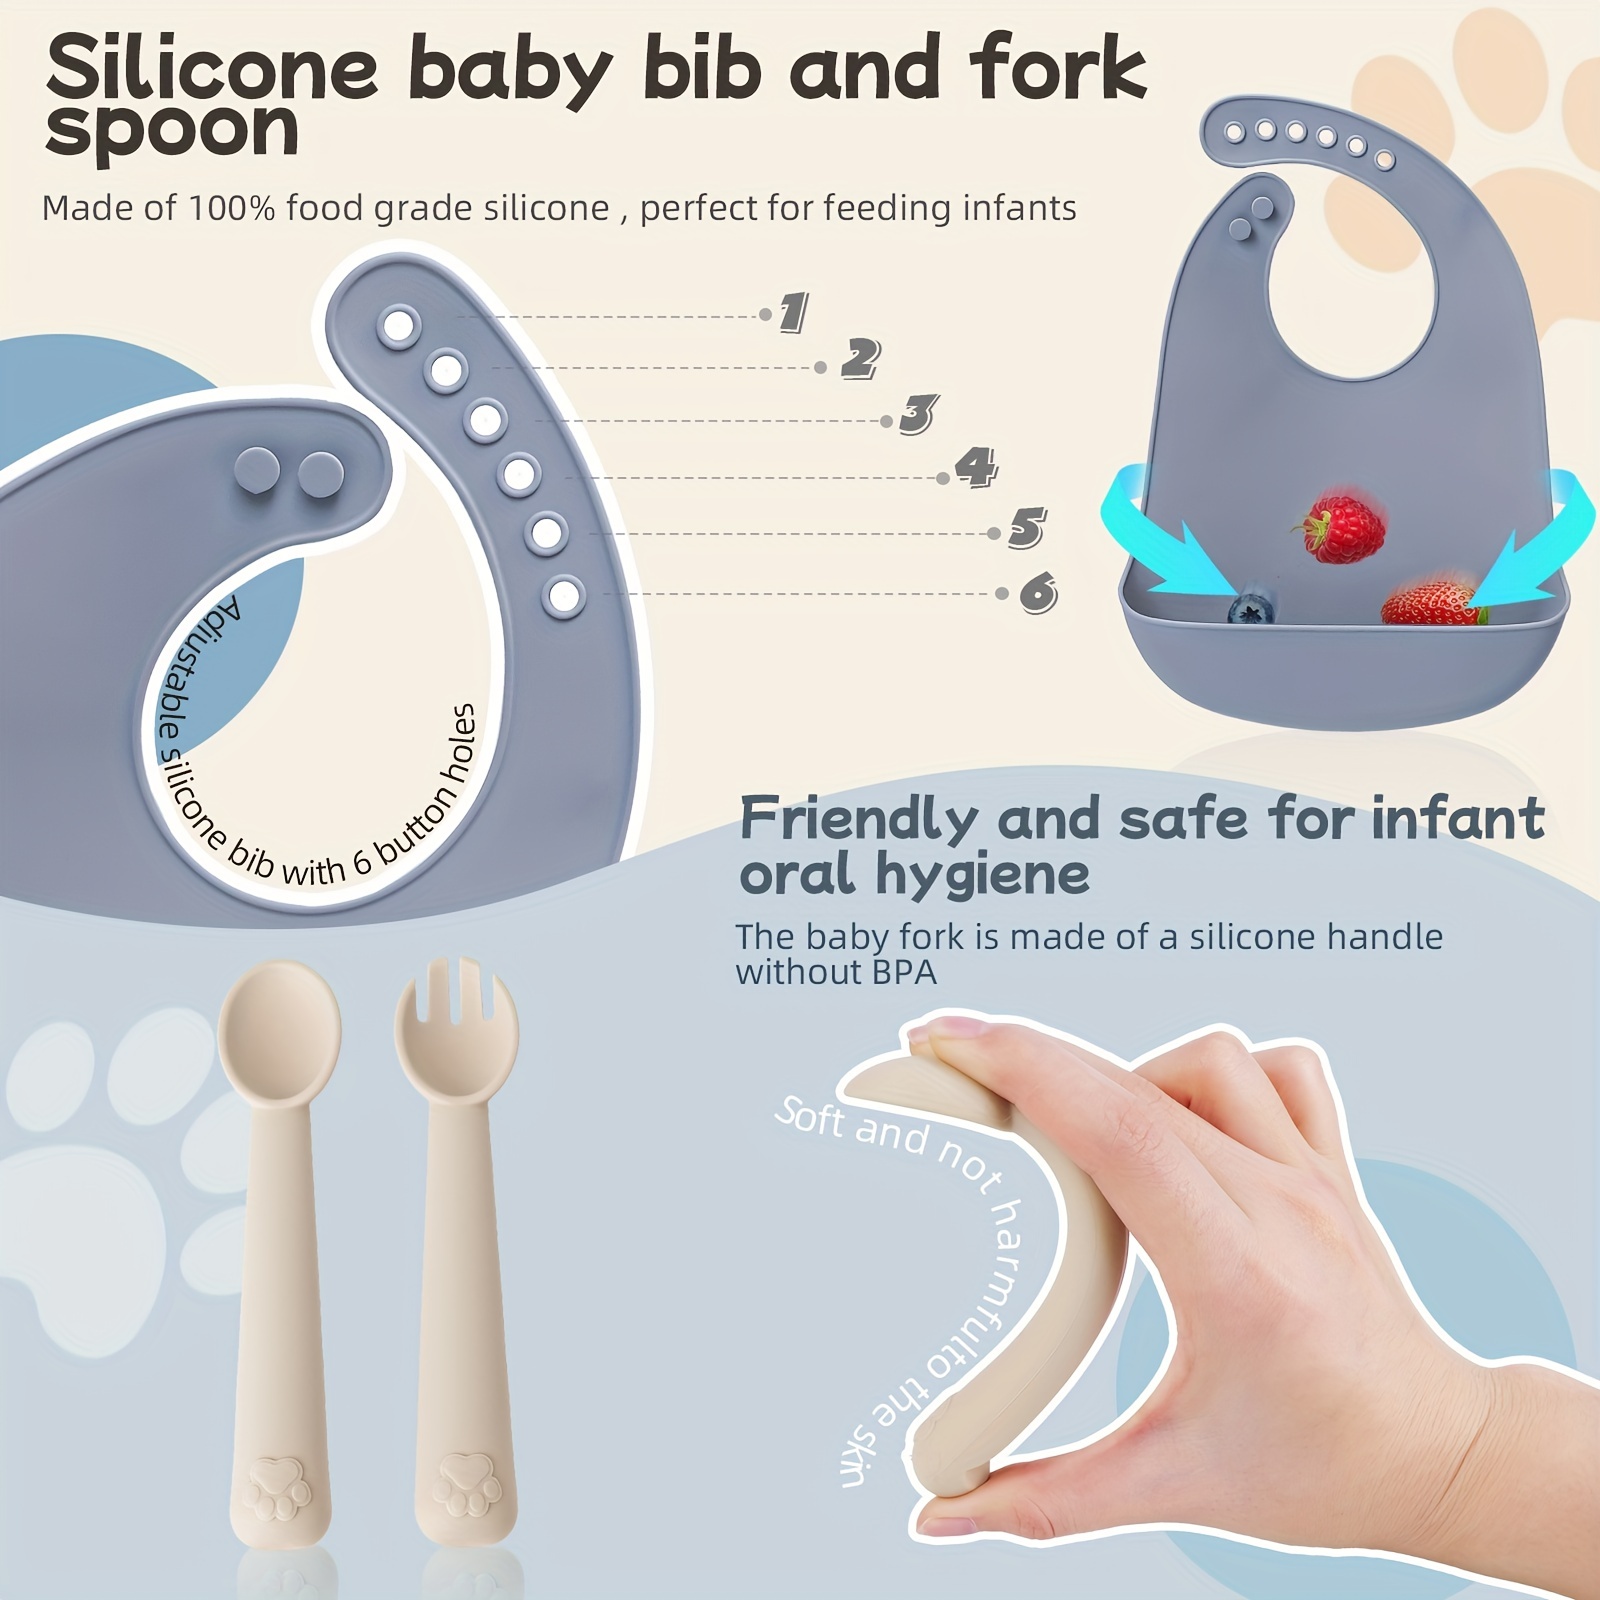 Baby Feeding Set, Toddler Silicone Feeding Set, Baby Dish with Suction,  Adjustable and Waterproof bib, Soft Spoon and Fork, Divided Tableware Set.